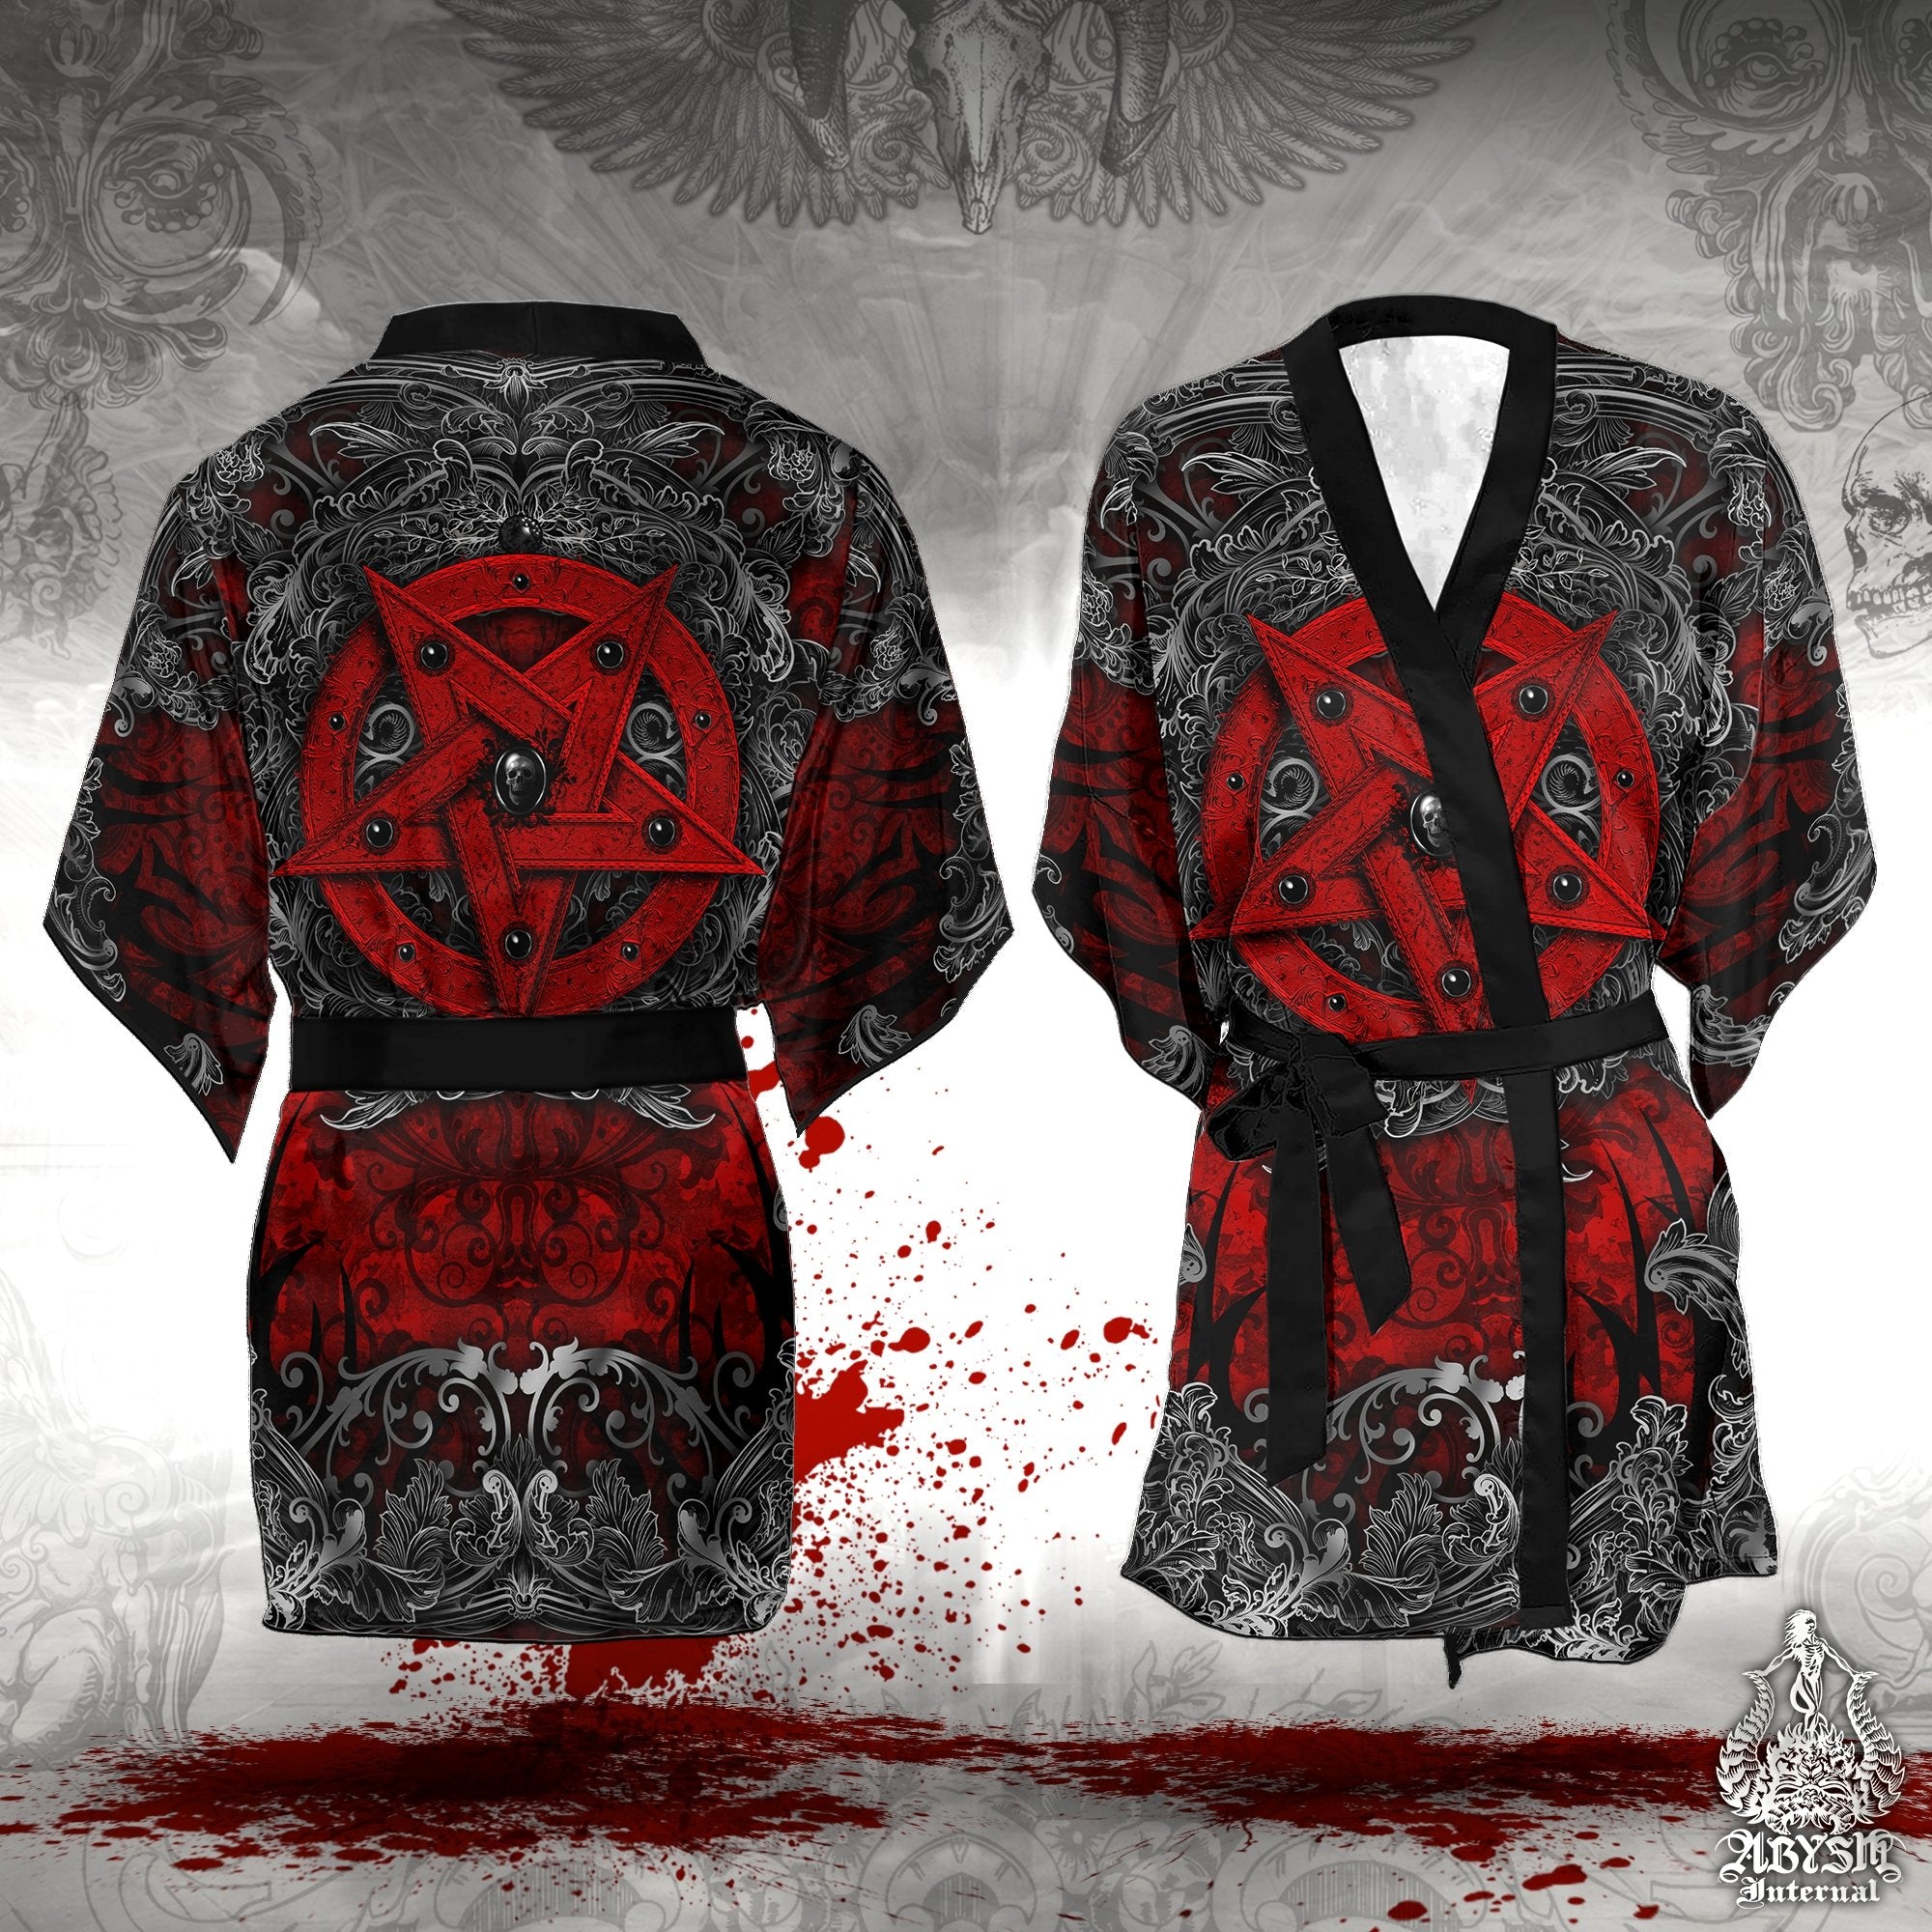 Pentagram Cover Up, Beach Outfit, Party Kimono, Metal Summer Festival Robe, Satanic Gothic Indie and Alternative Clothing, Unisex - Red - Abysm Internal